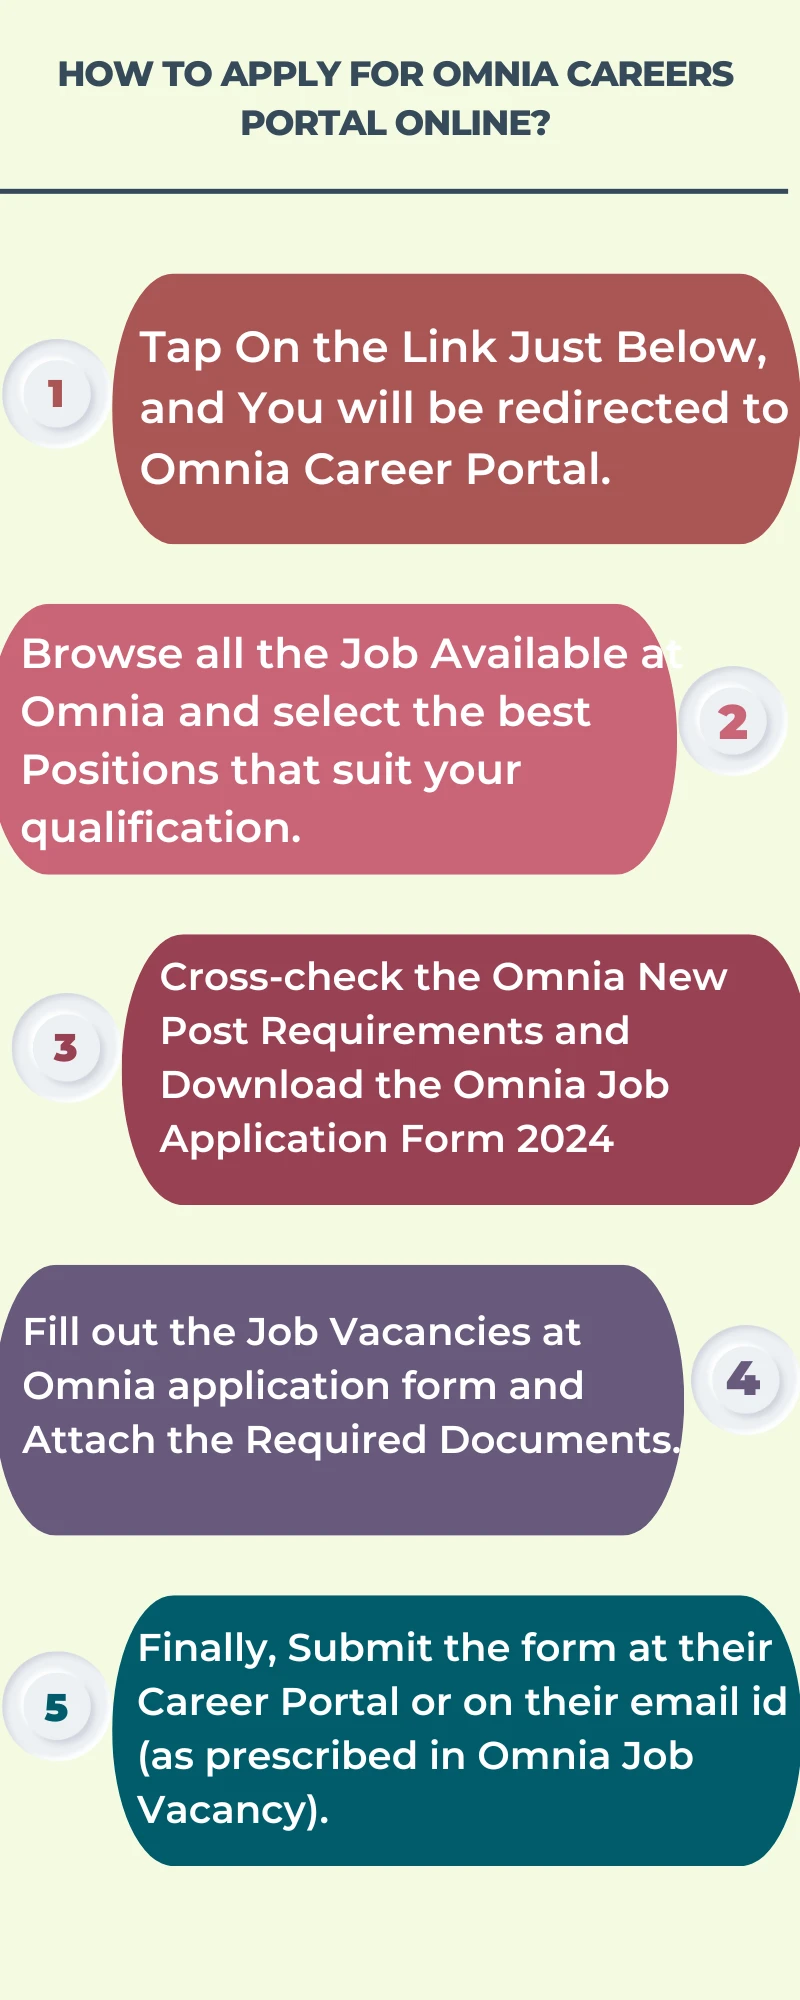 How To Apply for Omnia Careers Portal Online?